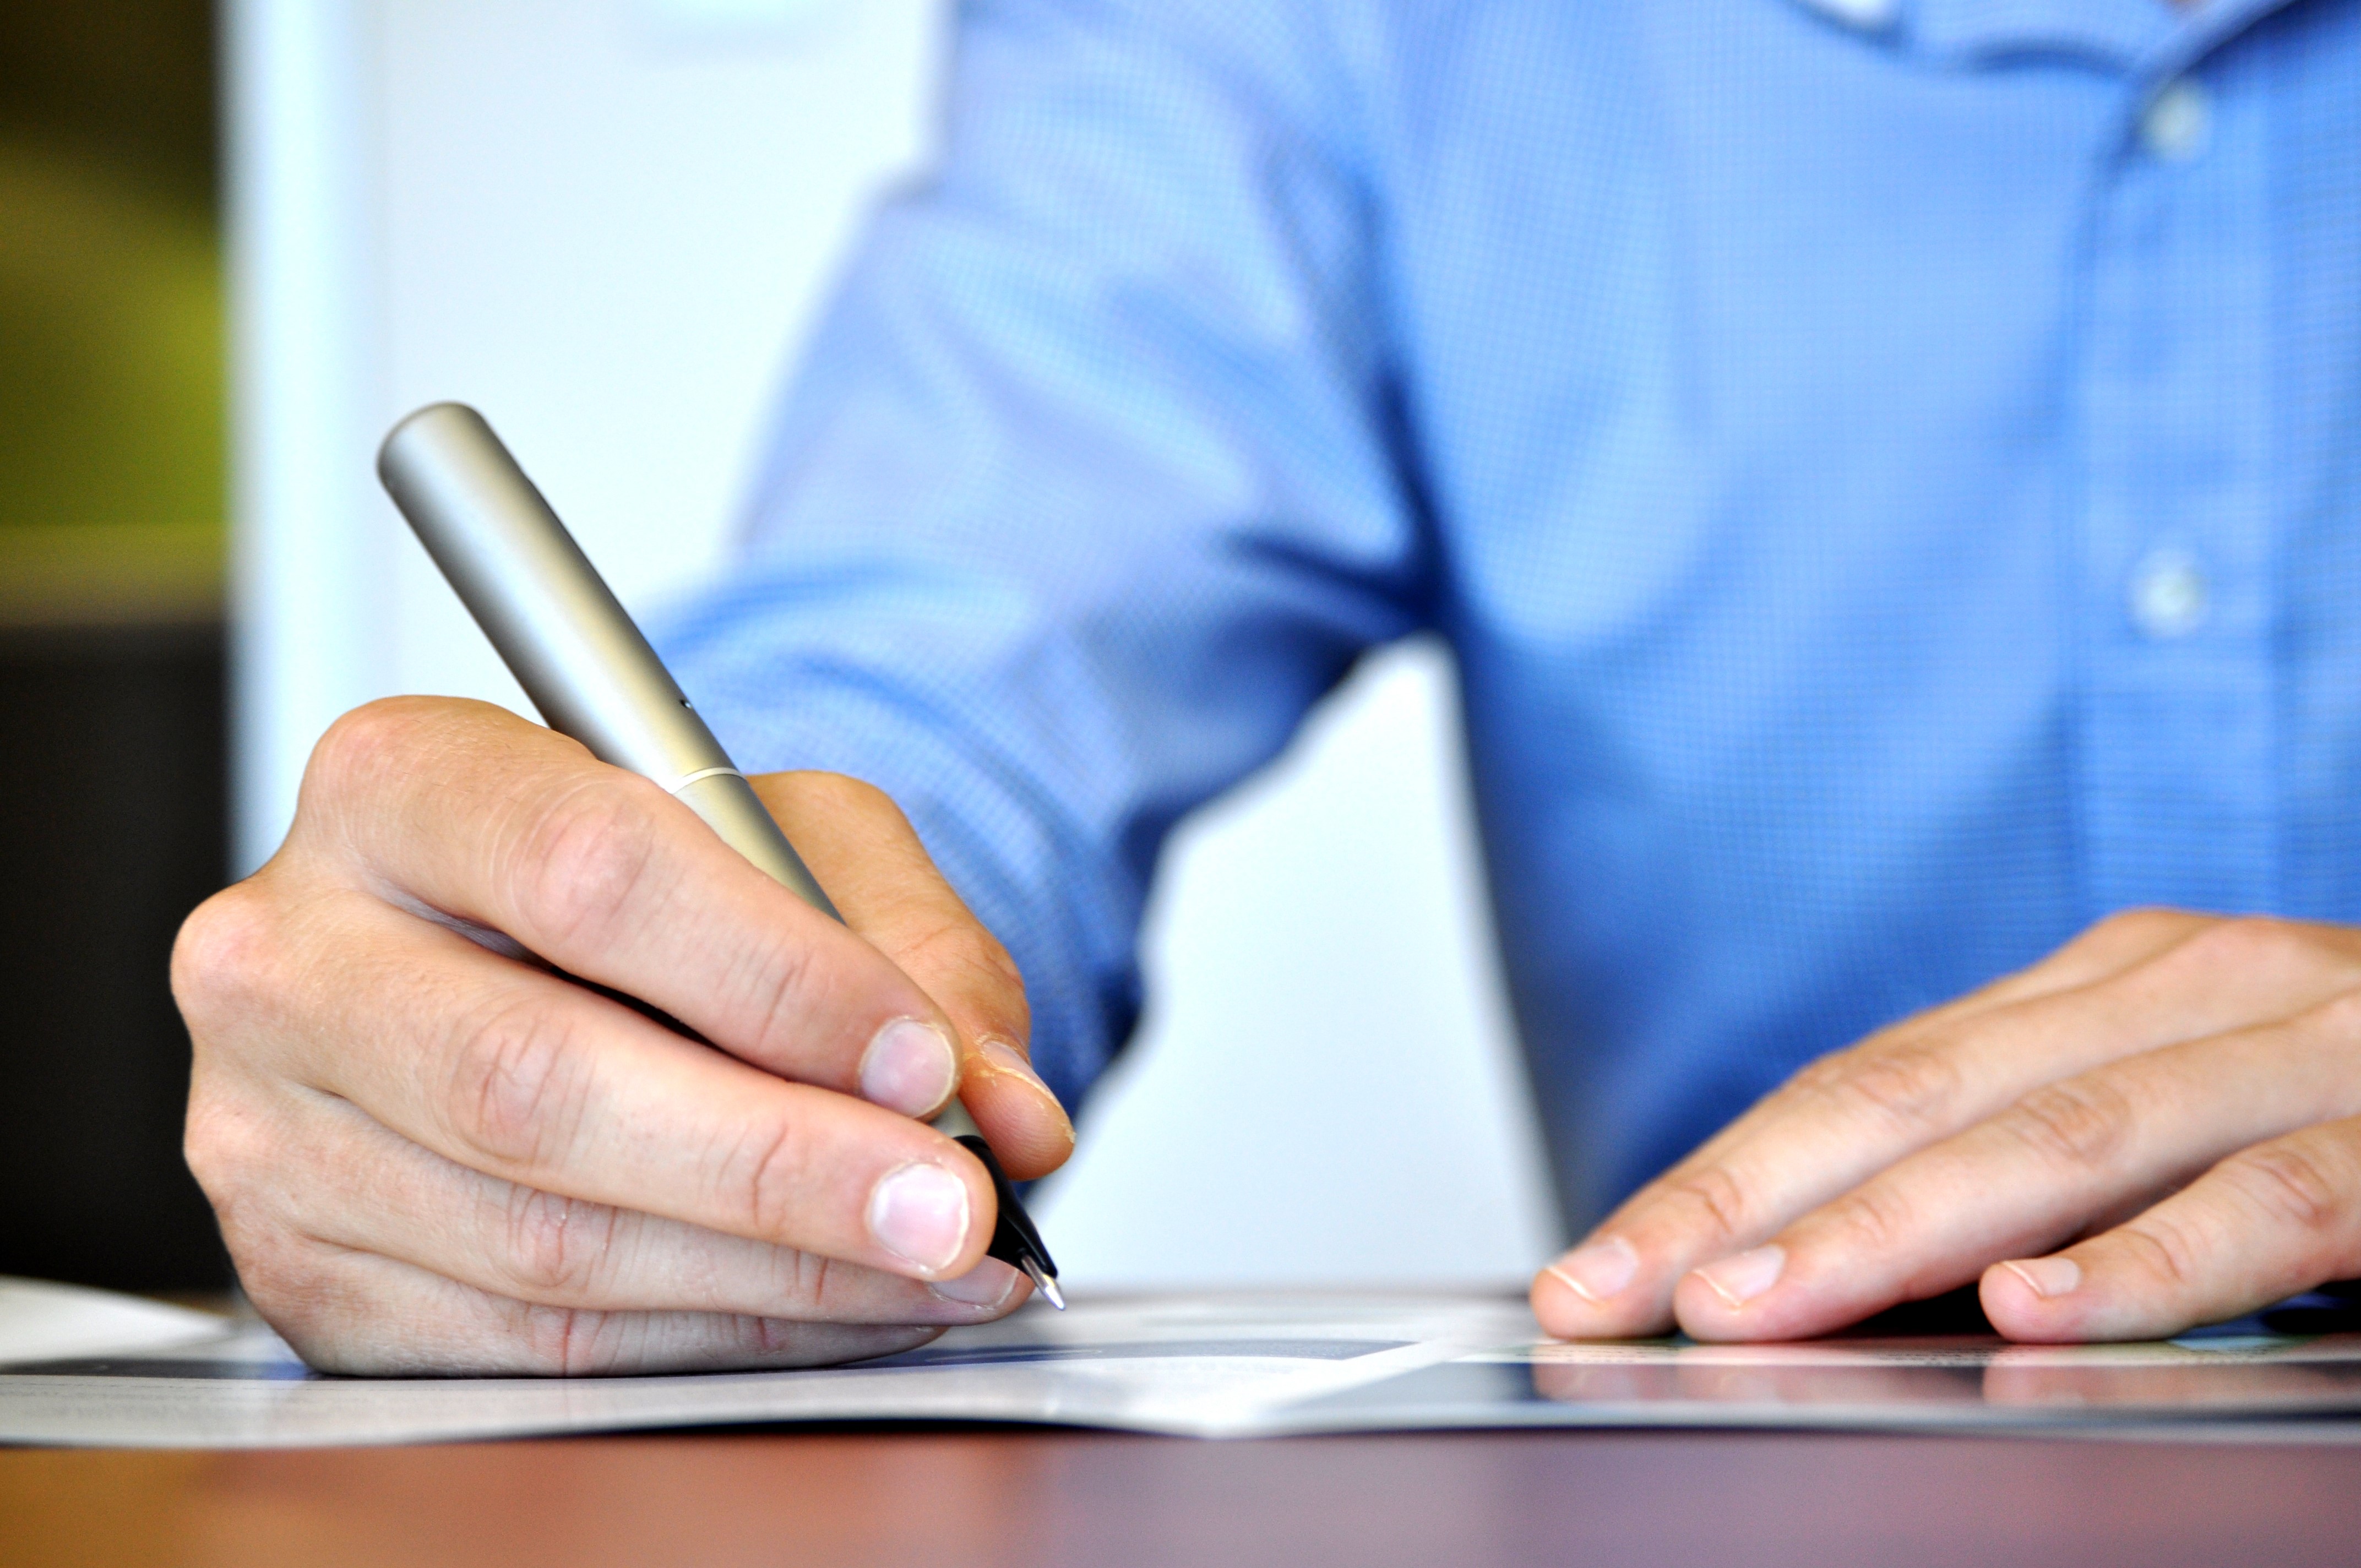  A person in a blue shirt is writing on a piece of paper with a pen. The image represents the search query 'Professional CV review services'.